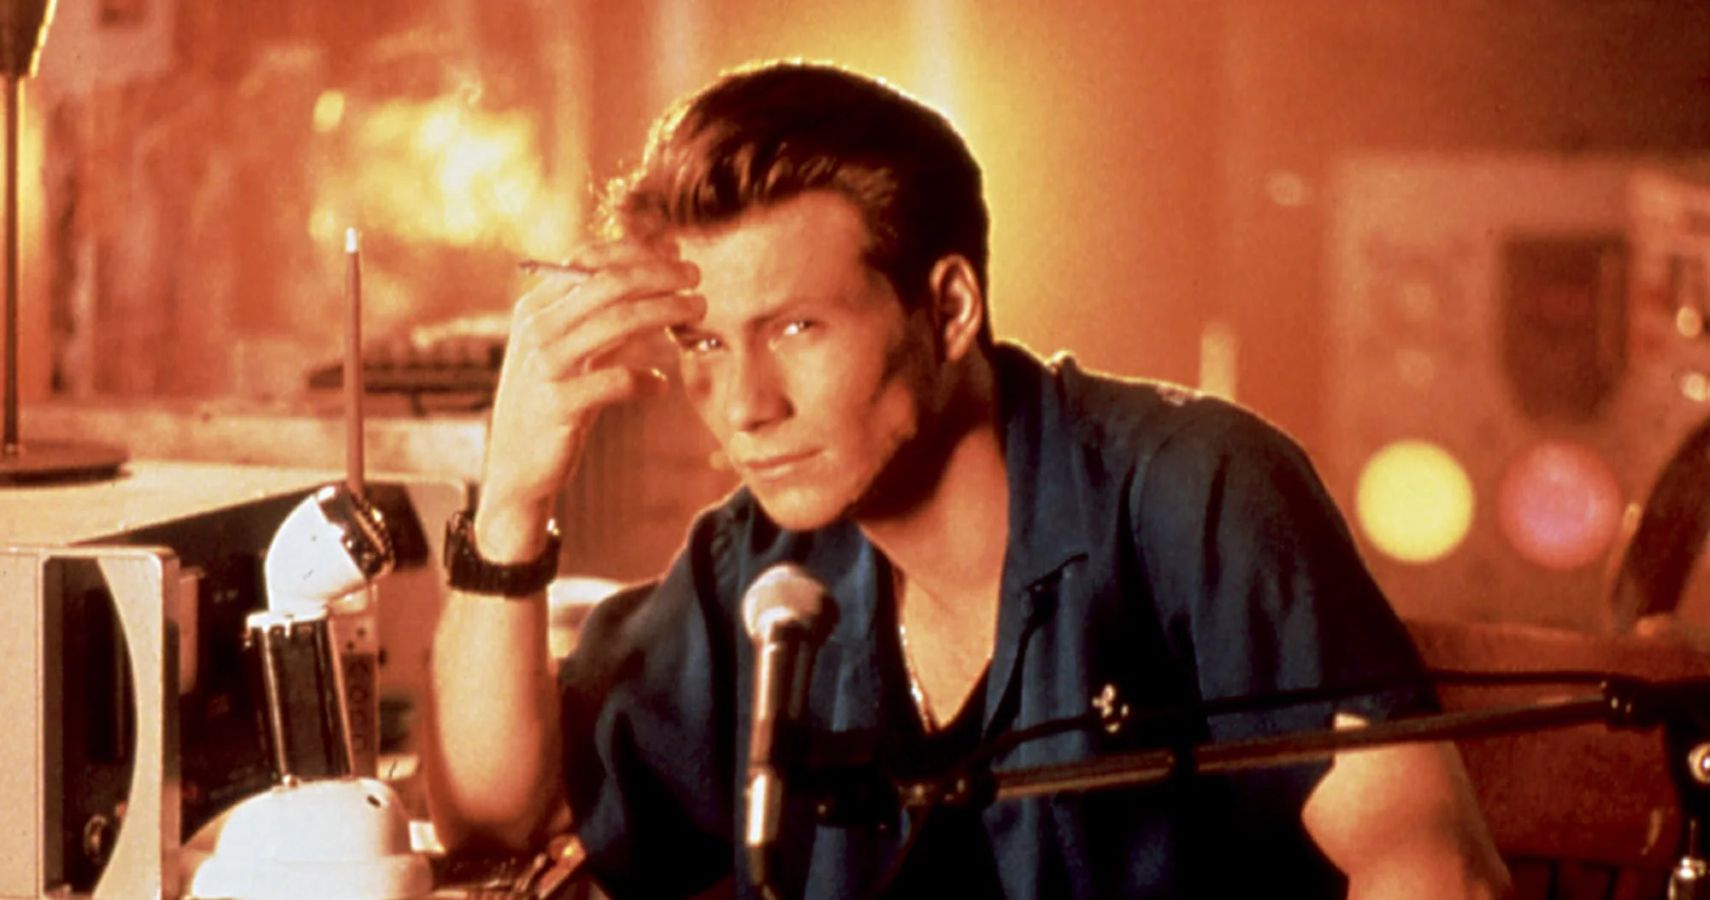 Christian Slater's 10 Best Movies, According To Rotten